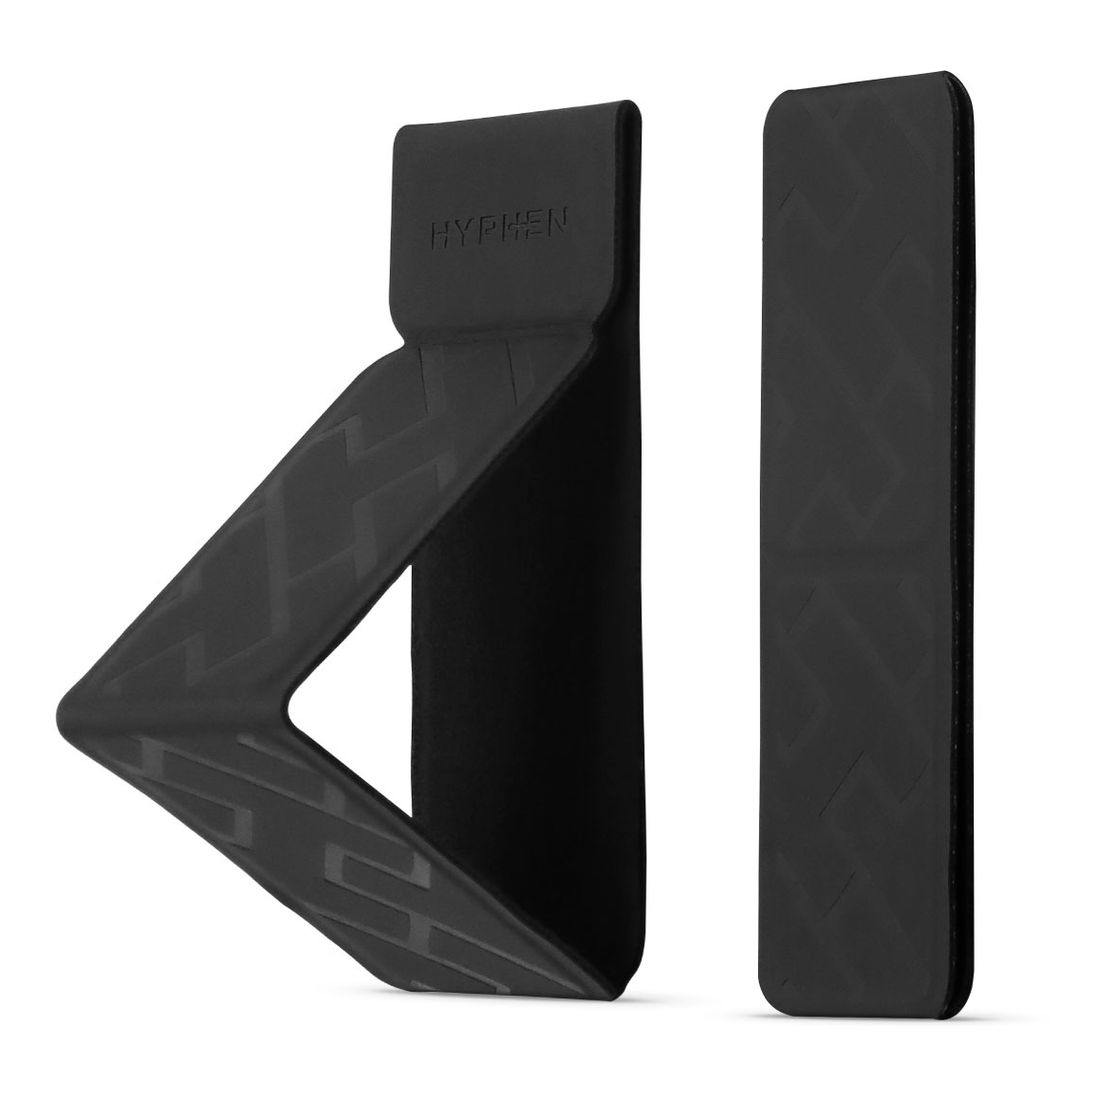 HYPHEN Smartphone Case Grip Holder and Stand - Black - Fits up to 6.1-Inch